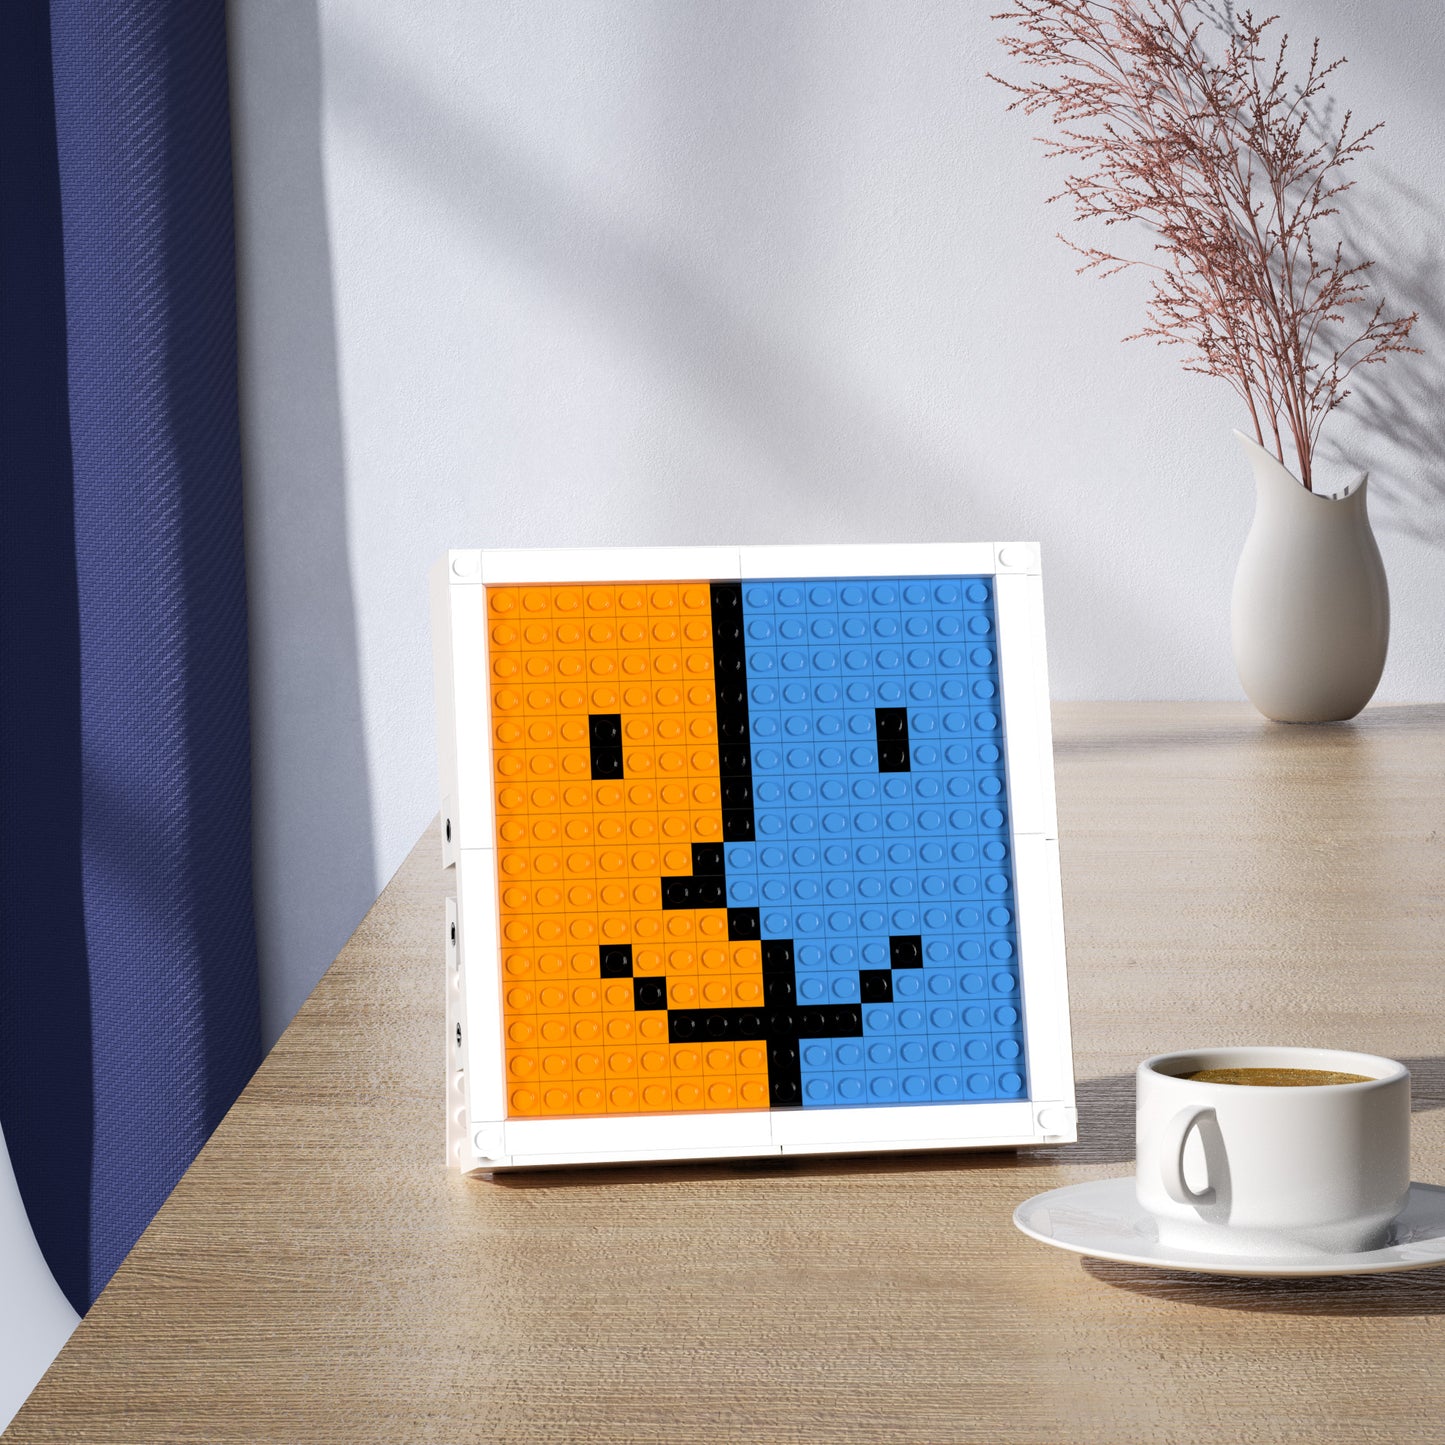 Pixel Art of Picasso's Smiling Face Compatible Lego Set - An Abstract Minimalist Decoration